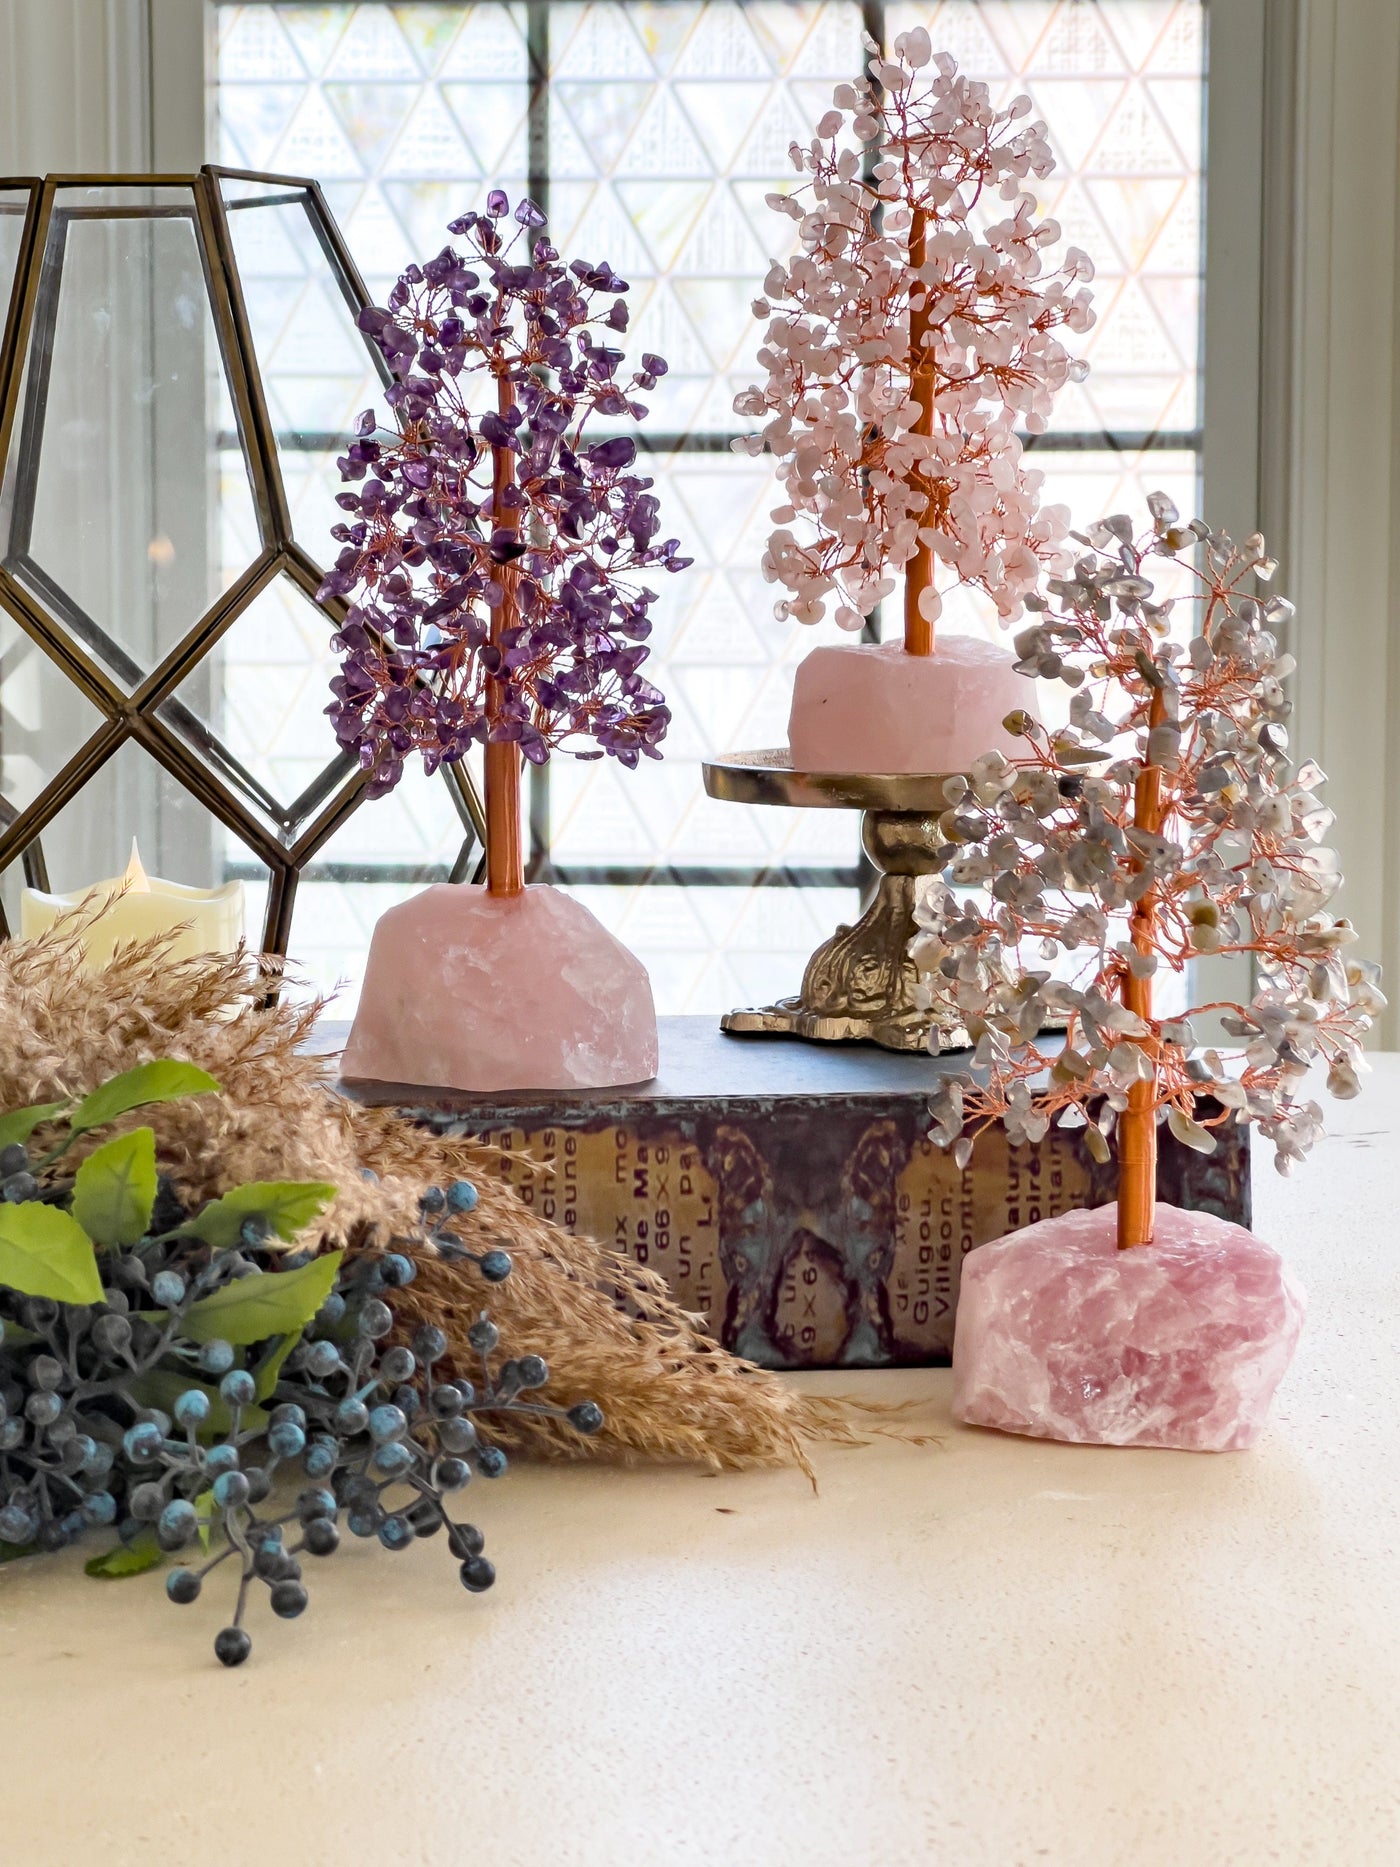 LARGE CRYSTAL TREES Revive In Style Vintage Furniture Painted Refinished Redesign Beautiful One of a Kind Artistic Antique Unique Home Decor Interior Design French Country Shabby Chic Cottage Farmhouse Grandmillenial Coastal Chalk Paint Metallic Glam Eclectic Quality Dovetailed Rustic Furniture Painter Pinterest Bedroom Living Room Entryway Kitchen Home Trends House Styles Decorating ideas